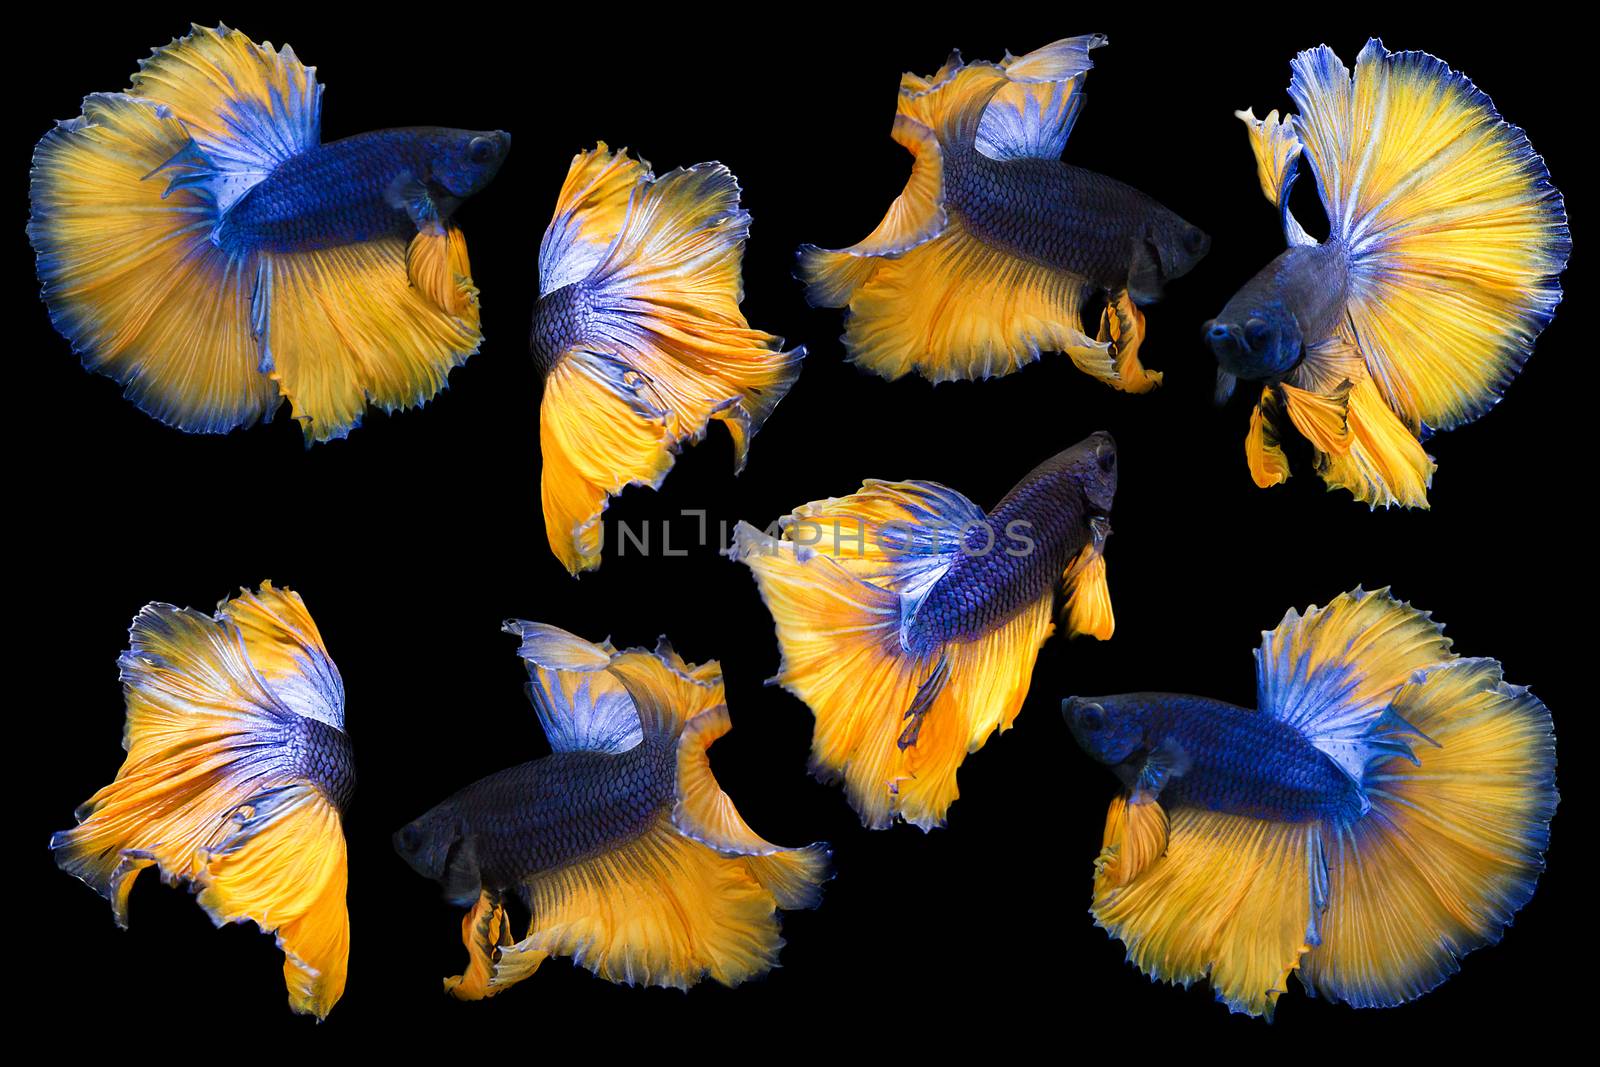 Collection Of Betta Fish Isolated On Black Background, Action Moving Moment Of Mustard Over Half Moon Betta, Siamese Fighting Fish by rakoptonLPN